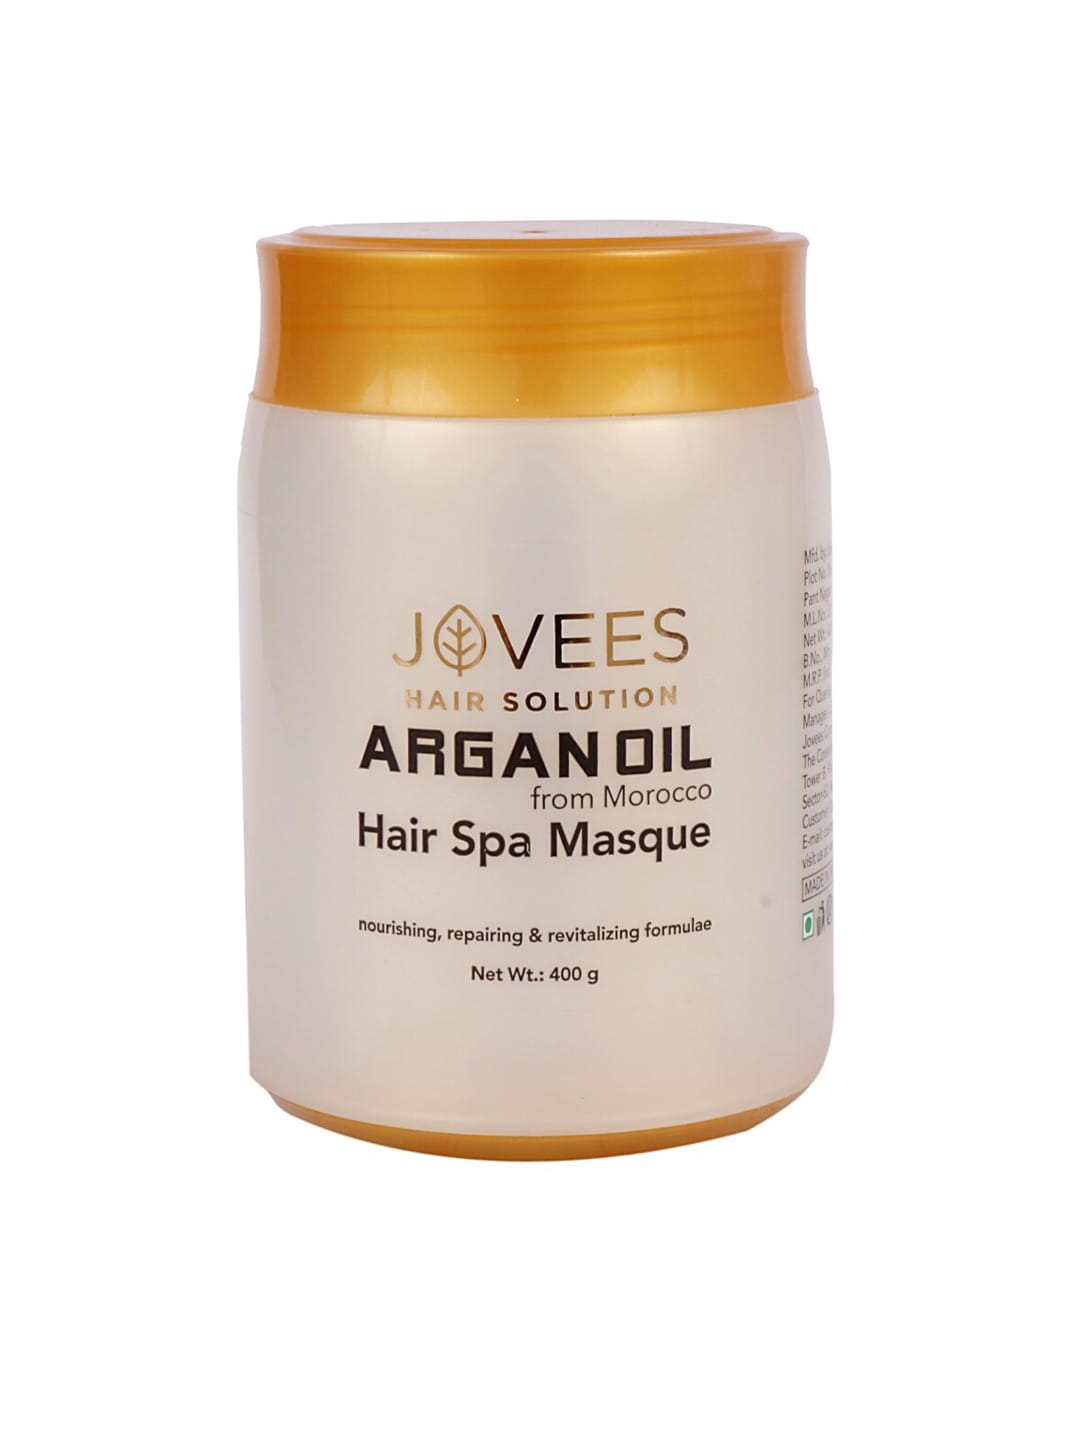 Jovees Herbal Argan Oil Hair Spa Masque with Ginger Extracts 400 g Price in  India, Full Specifications & Offers 